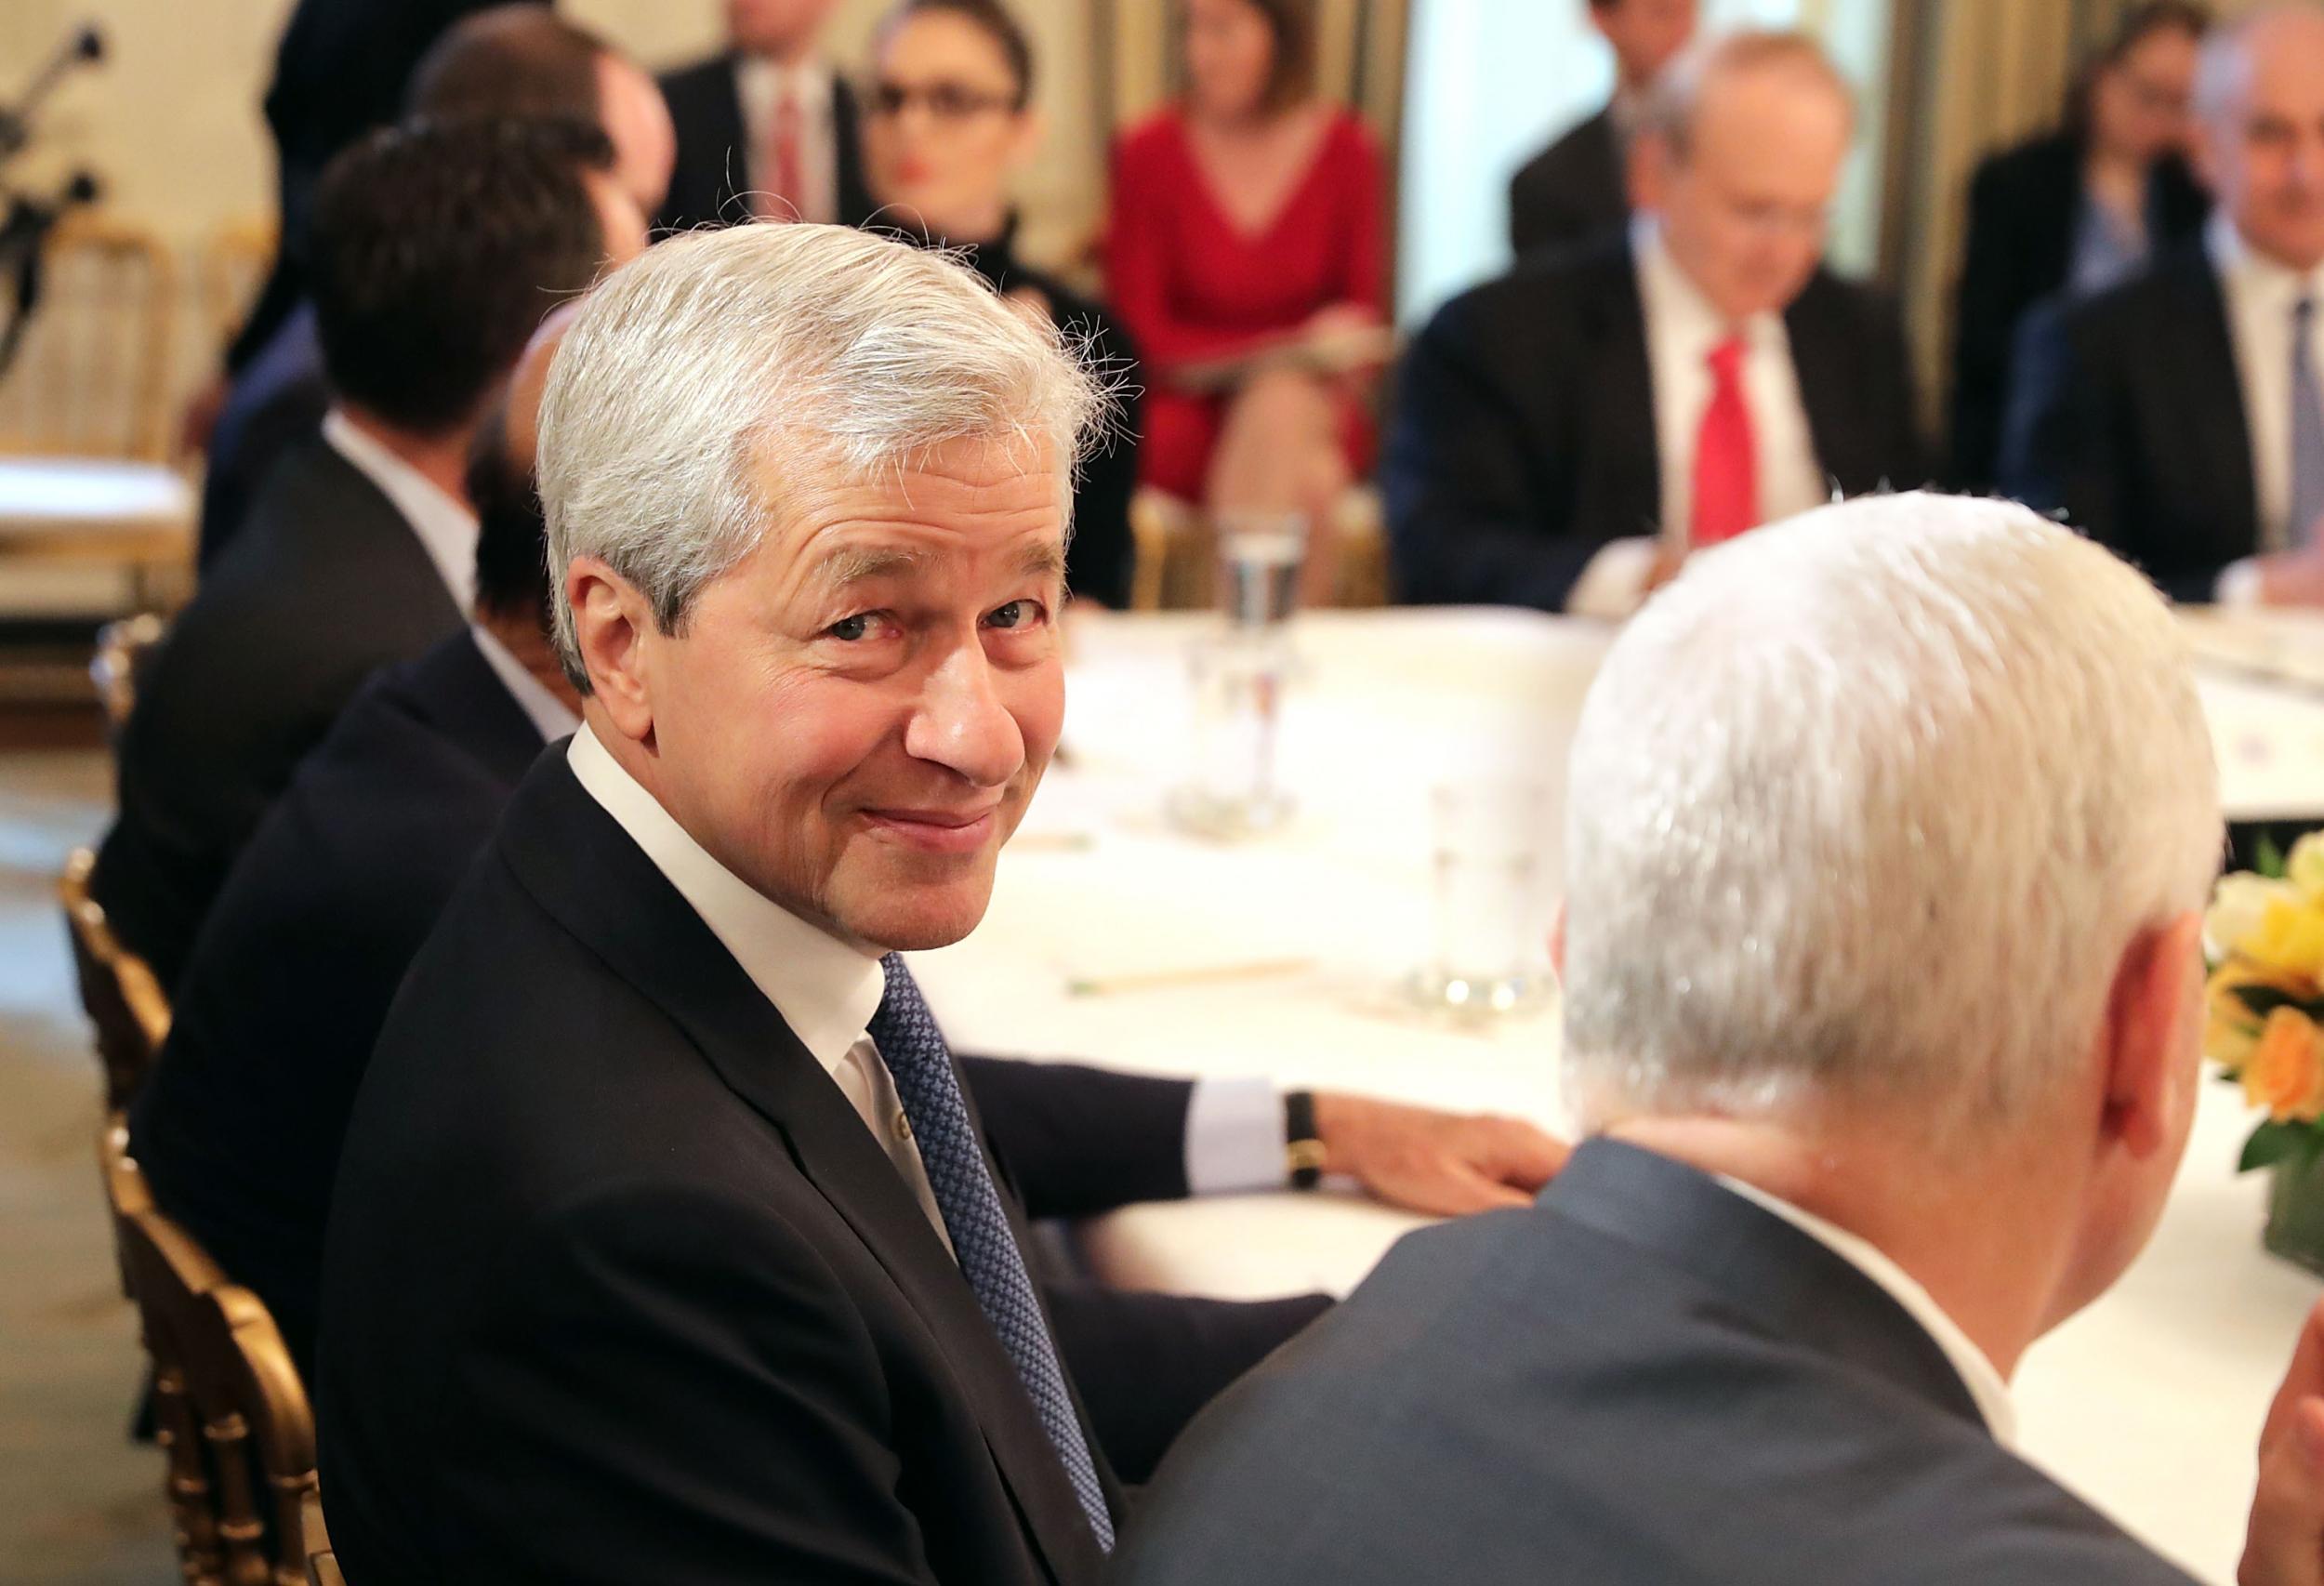 JP Morgan Chase CEO Jamie Dimon attends a policy forum with President Donald Trump and other members of the Strategic and Policy Forum